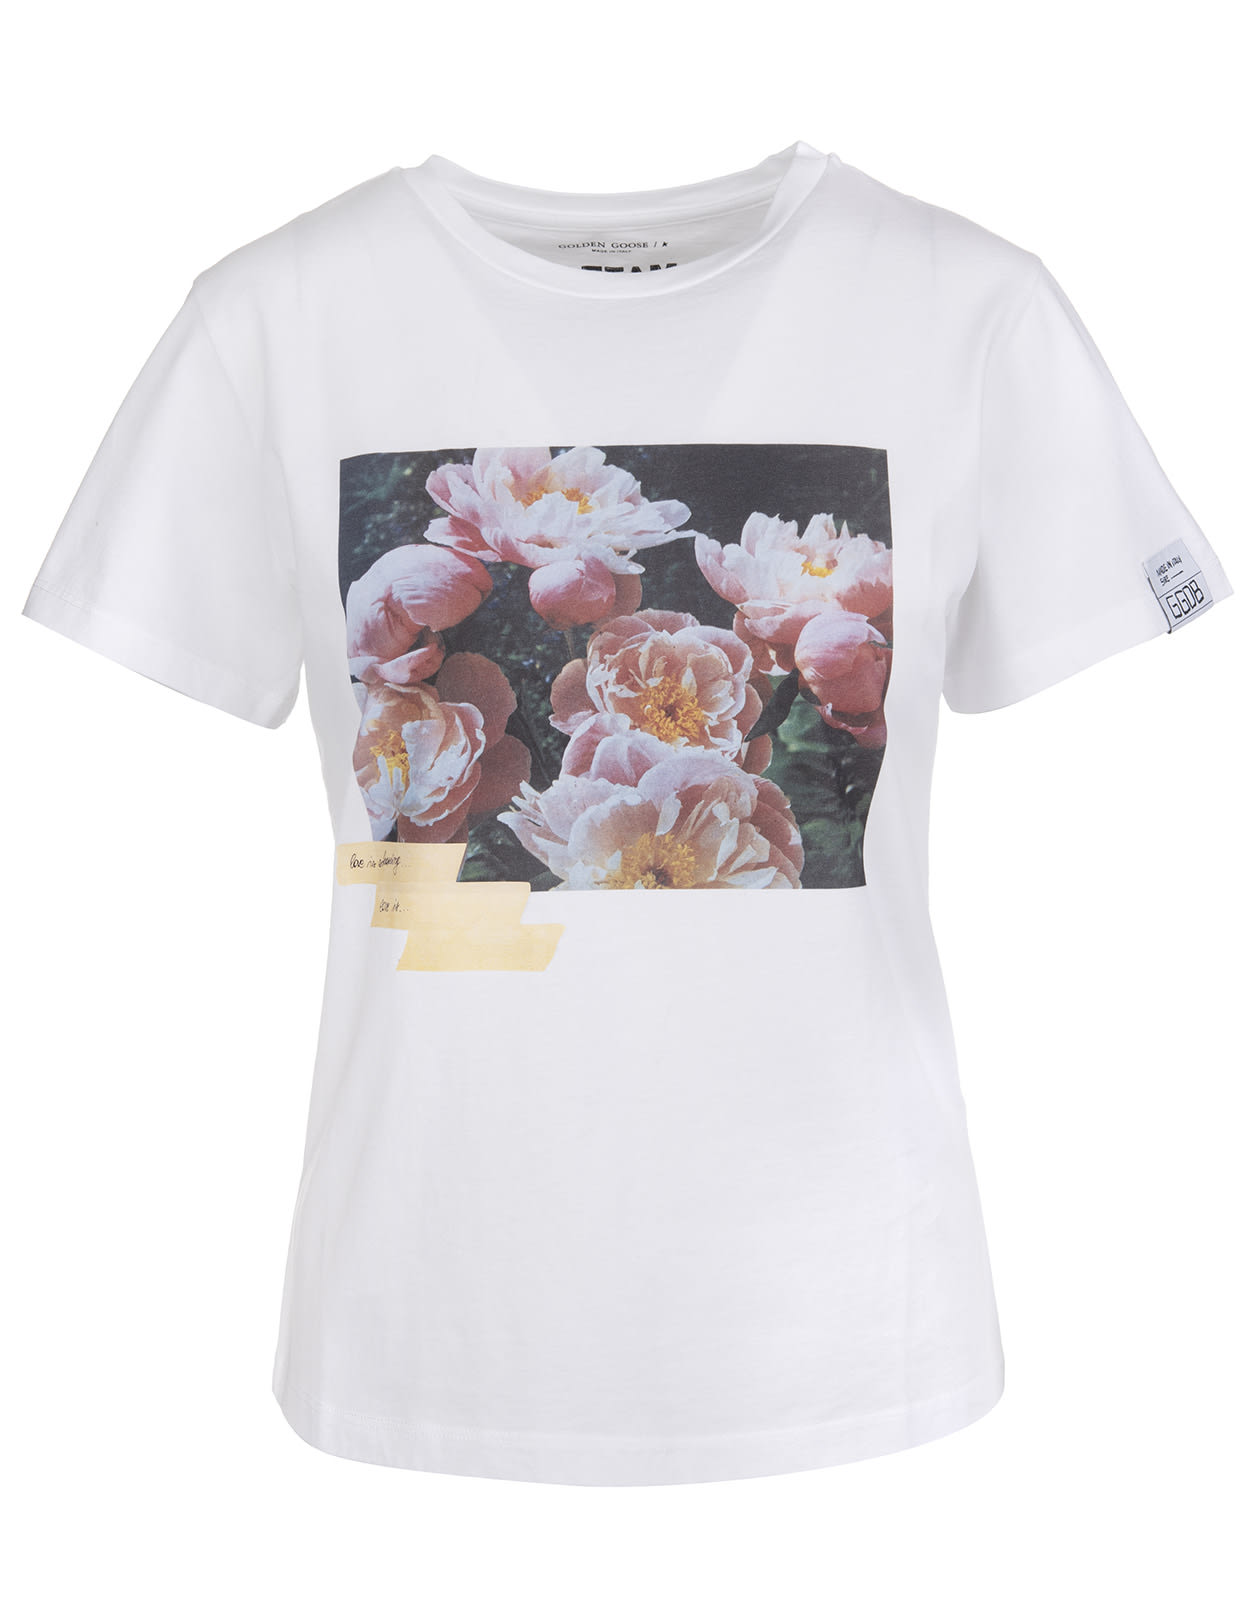 Golden Goose ANIA WHITE WOMAN T-SHIRT DREAM MAKER COLLECTION WITH ADHESIVE TAPE EFFECT PRINT